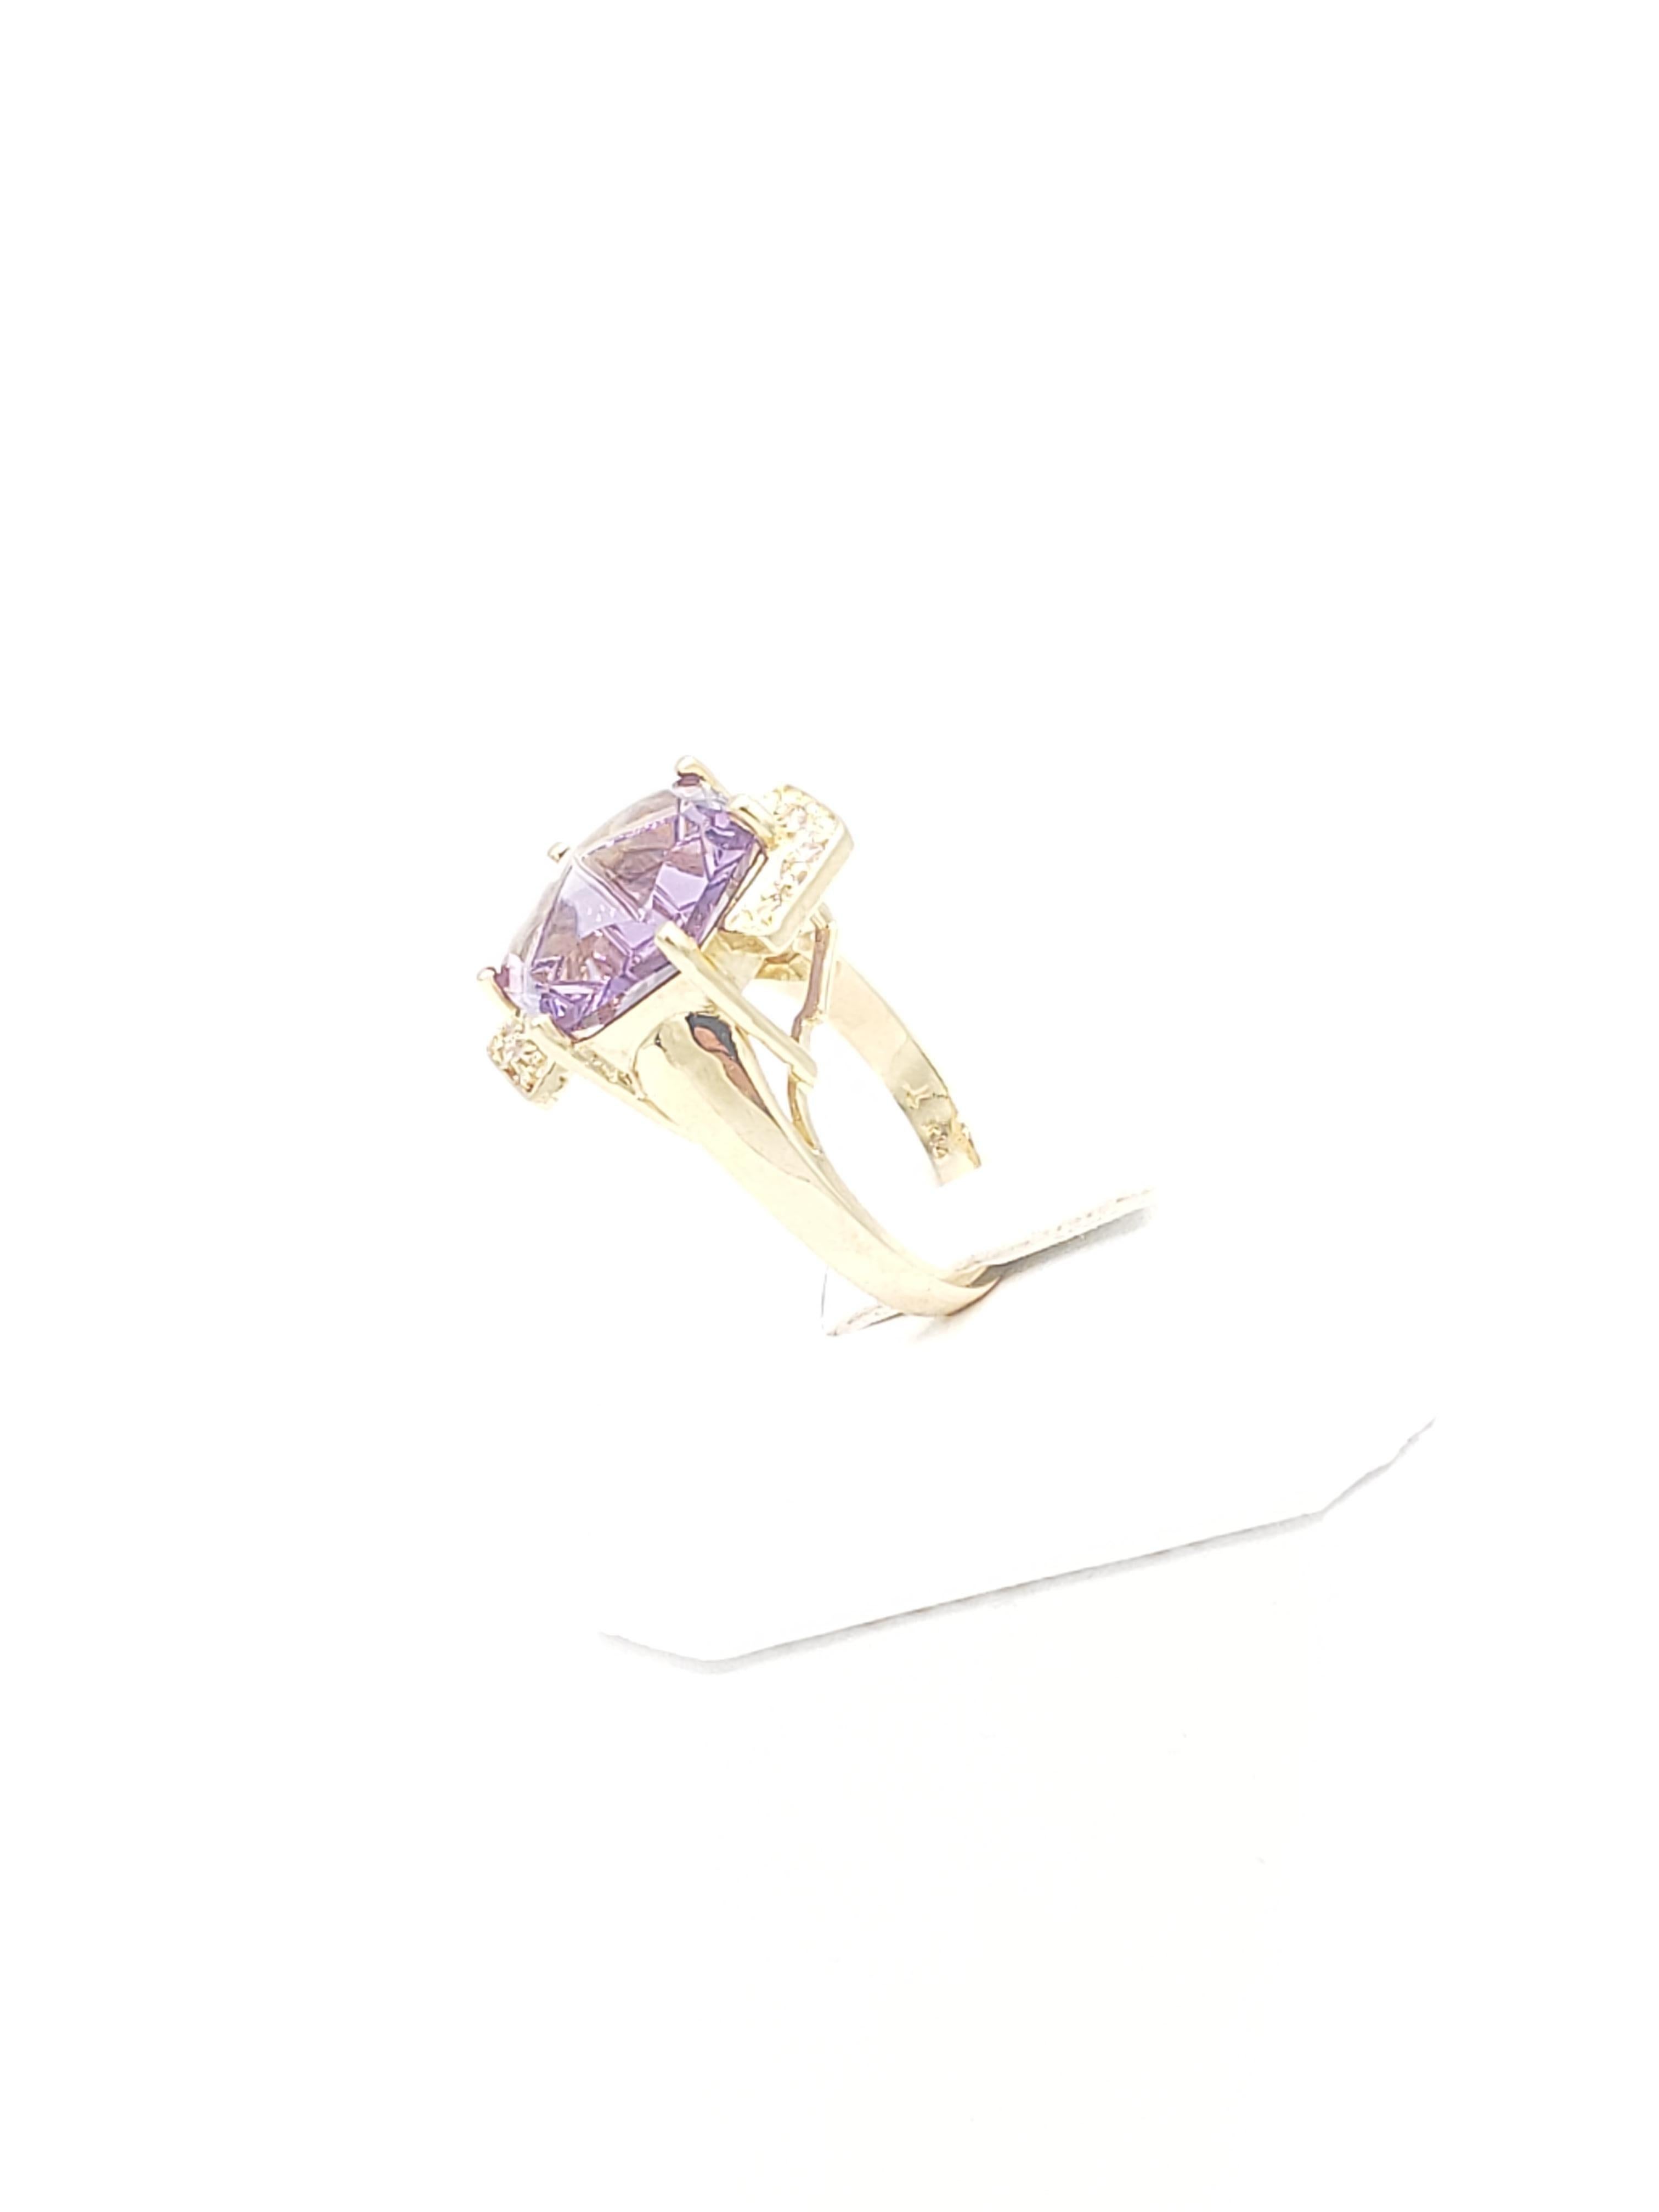 NEW 8 Ct. Natural Amethyst Ring with Diamonds in 14k Solid Yellow Gold  For Sale 4